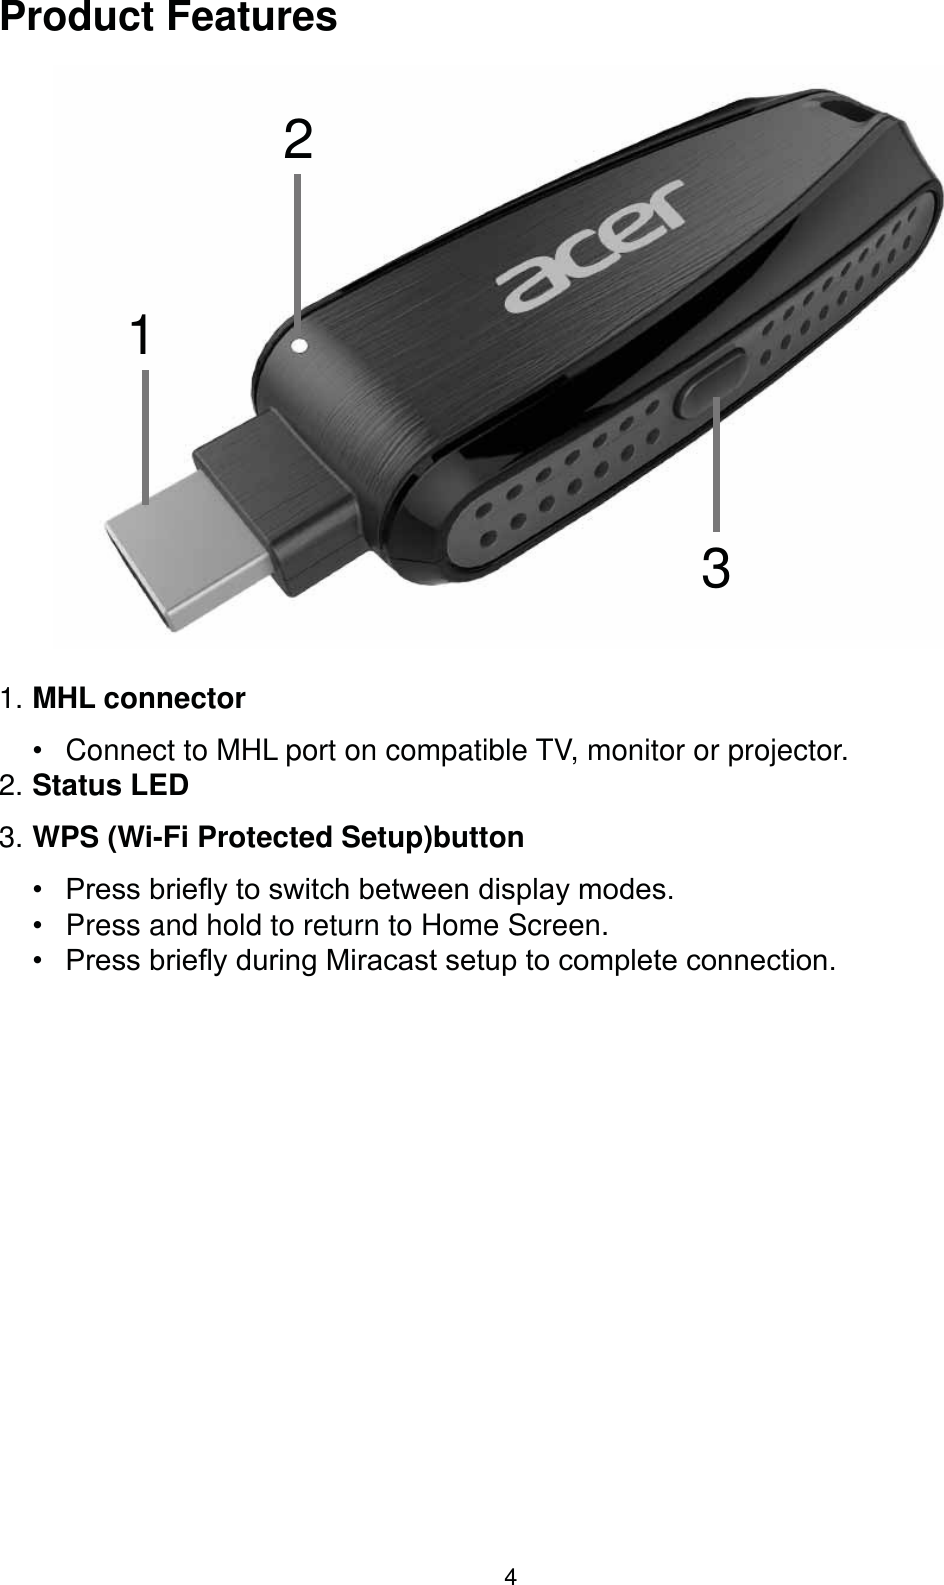 4Product Features1231. MHL connector  Connect to MHL port on compatible TV, monitor or projector.2. Status LED3. WPS (Wi-Fi Protected Setup)button  3UHVVEULHÀ\WRVZLWFKEHWZHHQGLVSOD\PRGHV Press and hold to return to Home Screen. 3UHVVEULHÀ\GXULQJ0LUDFDVWVHWXSWRFRPSOHWHFRQQHFWLRQ